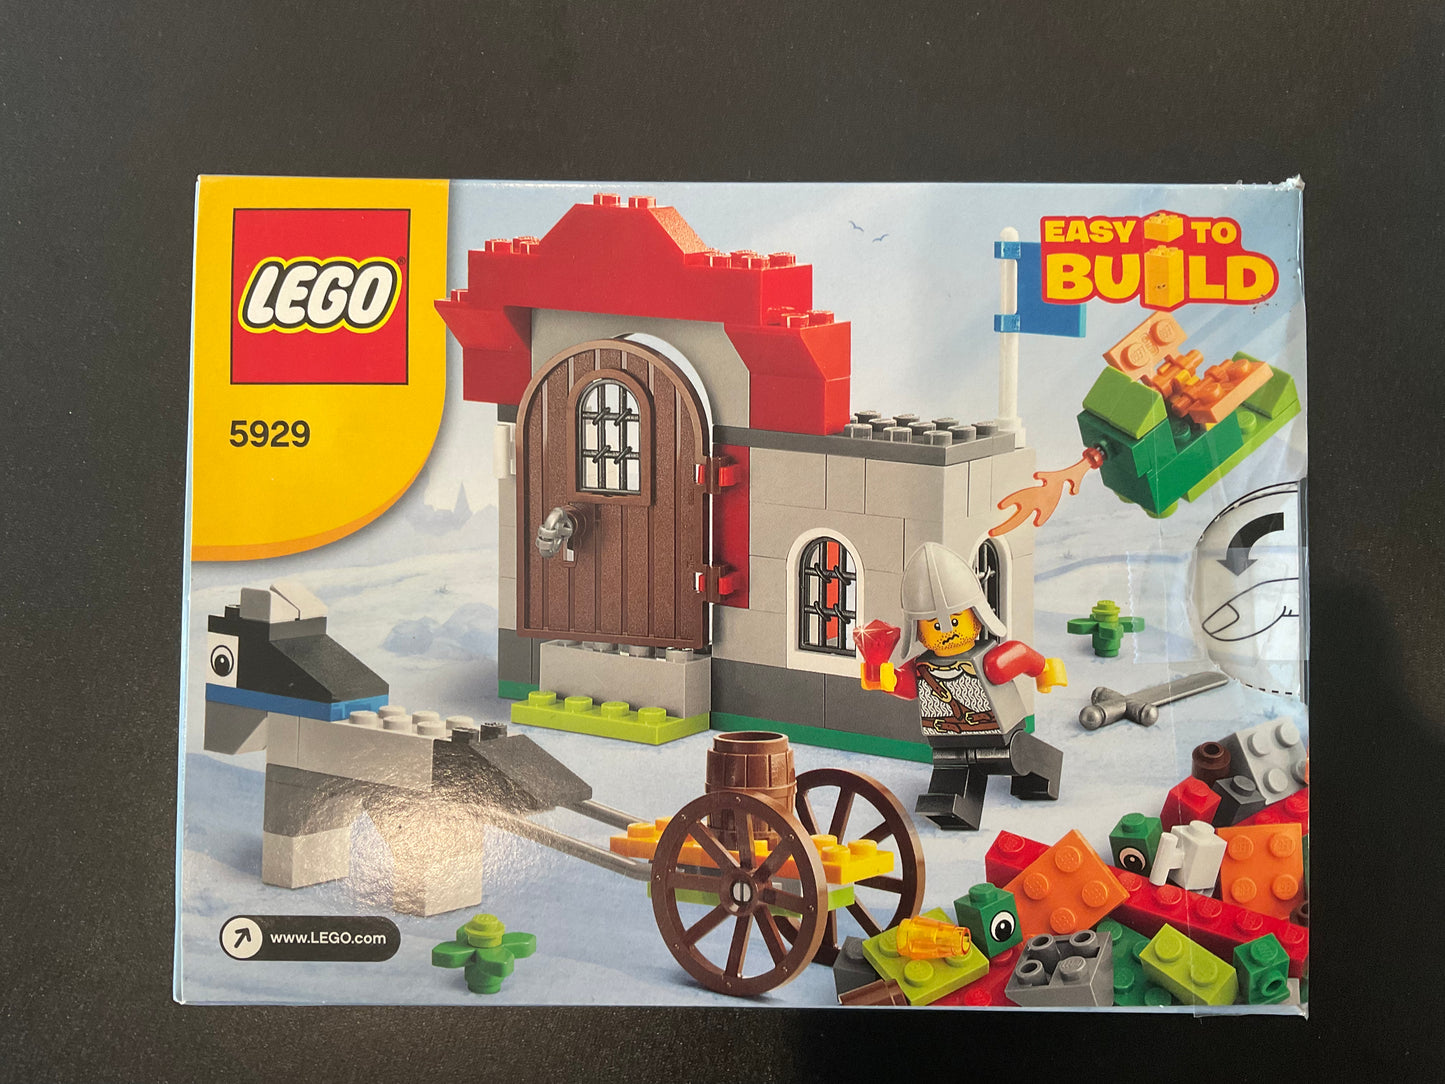 Lego Knight and Castle Building Set 5929 - Certified